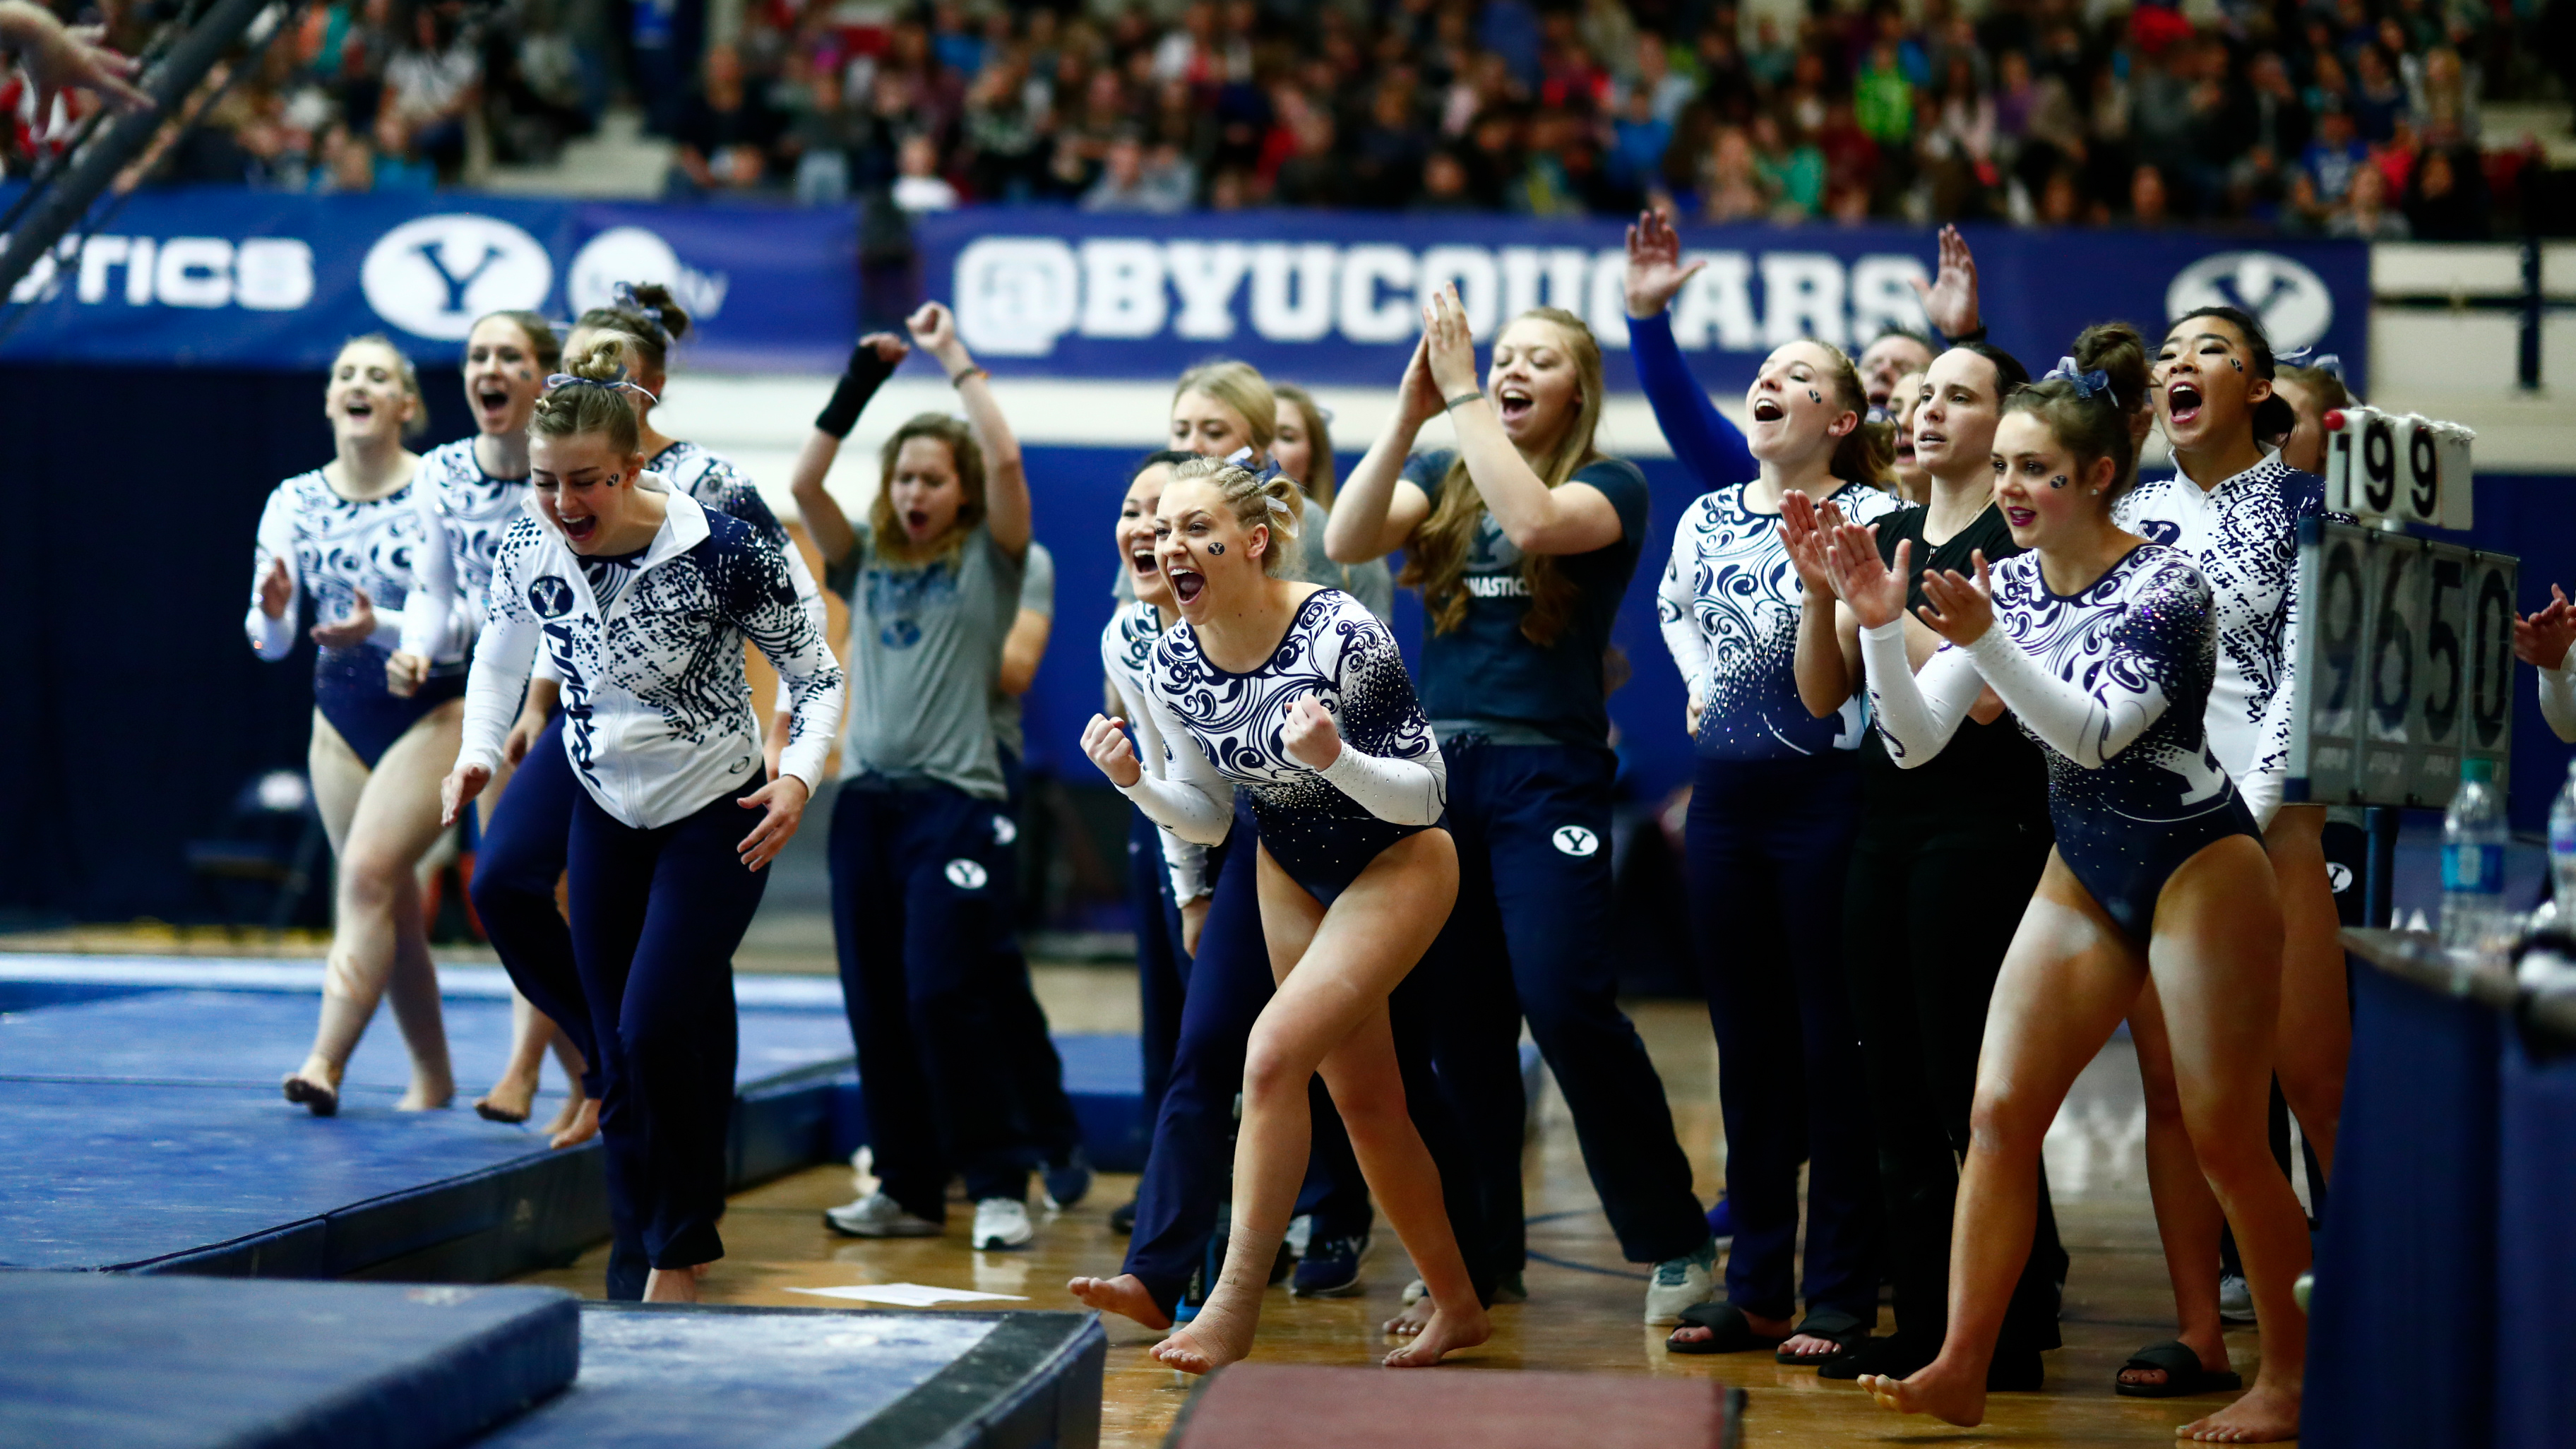 gymnasts cheer after beam routine